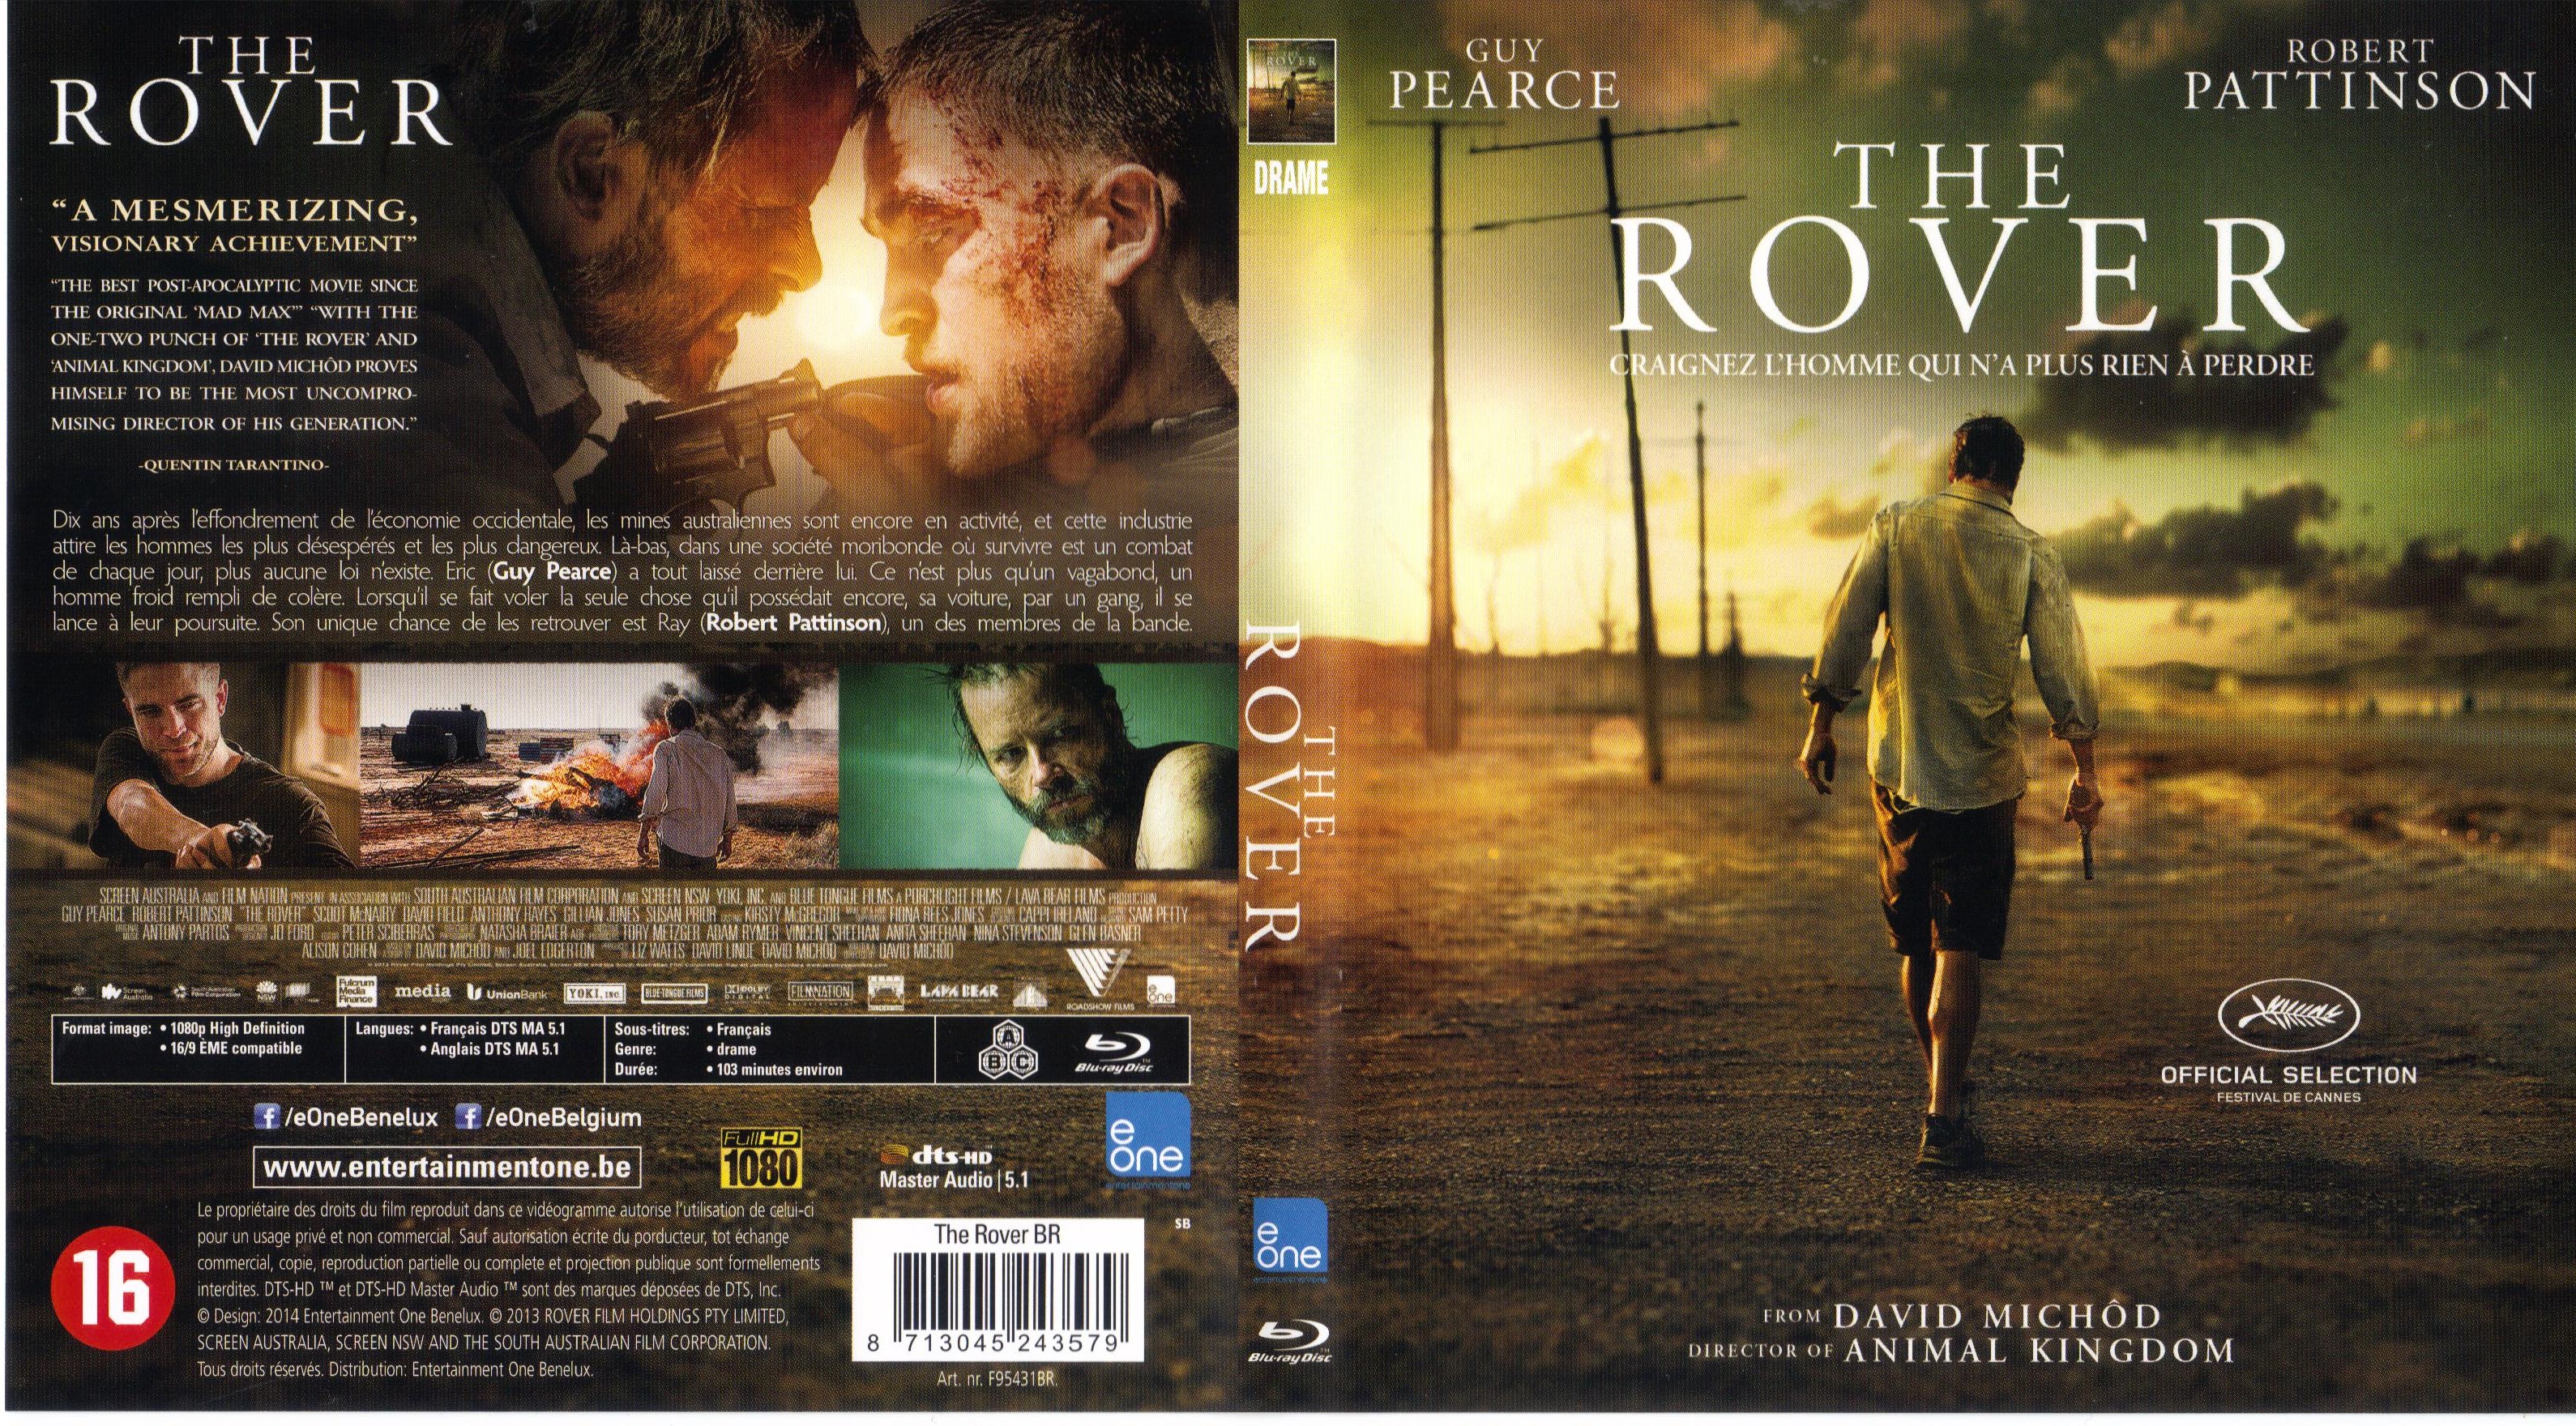 Jaquette DVD The Rover (BLU-RAY)